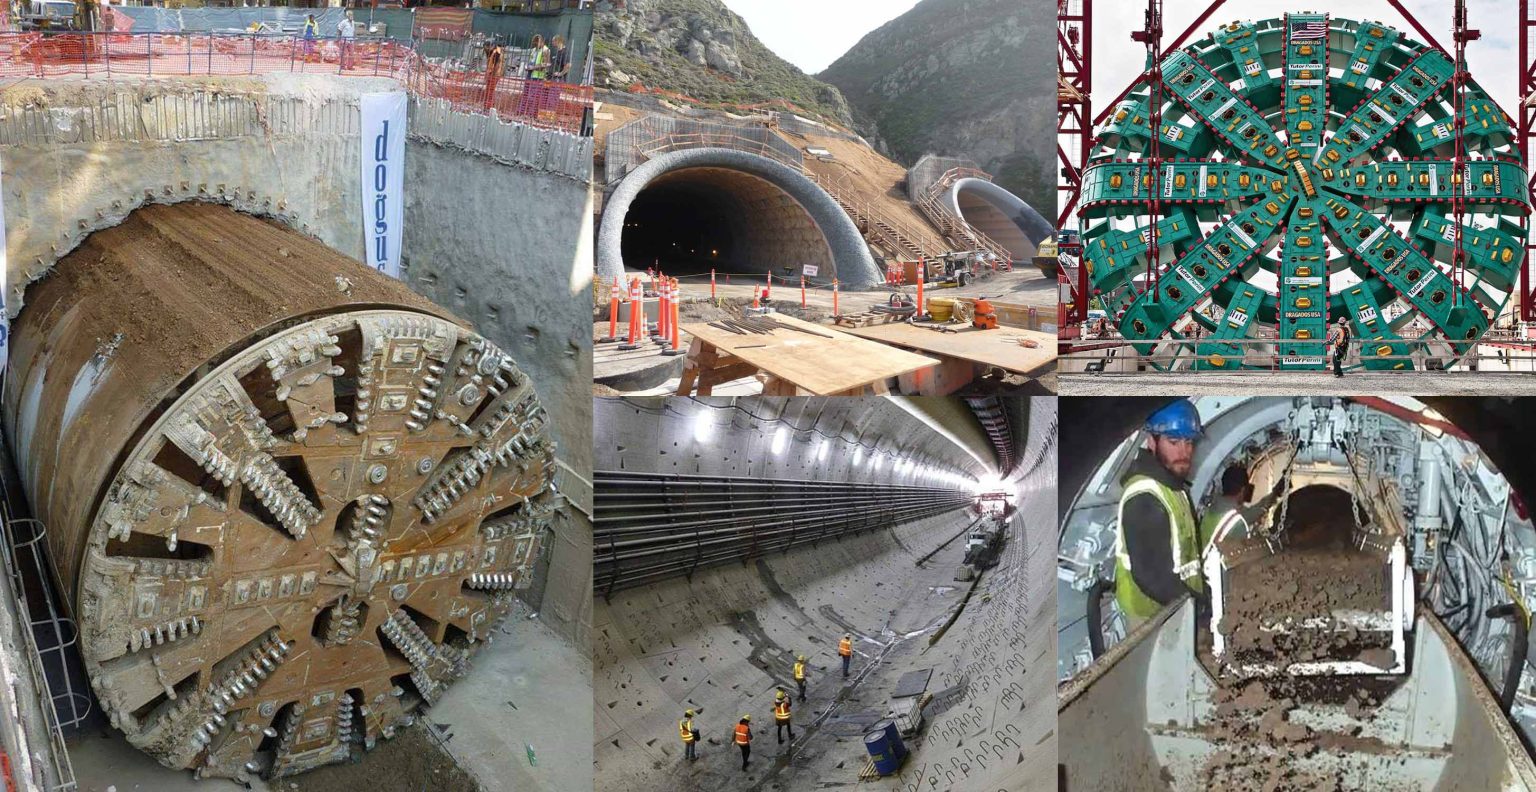  The image shows various aspects of tunnel excavation, including the use of AI technology.